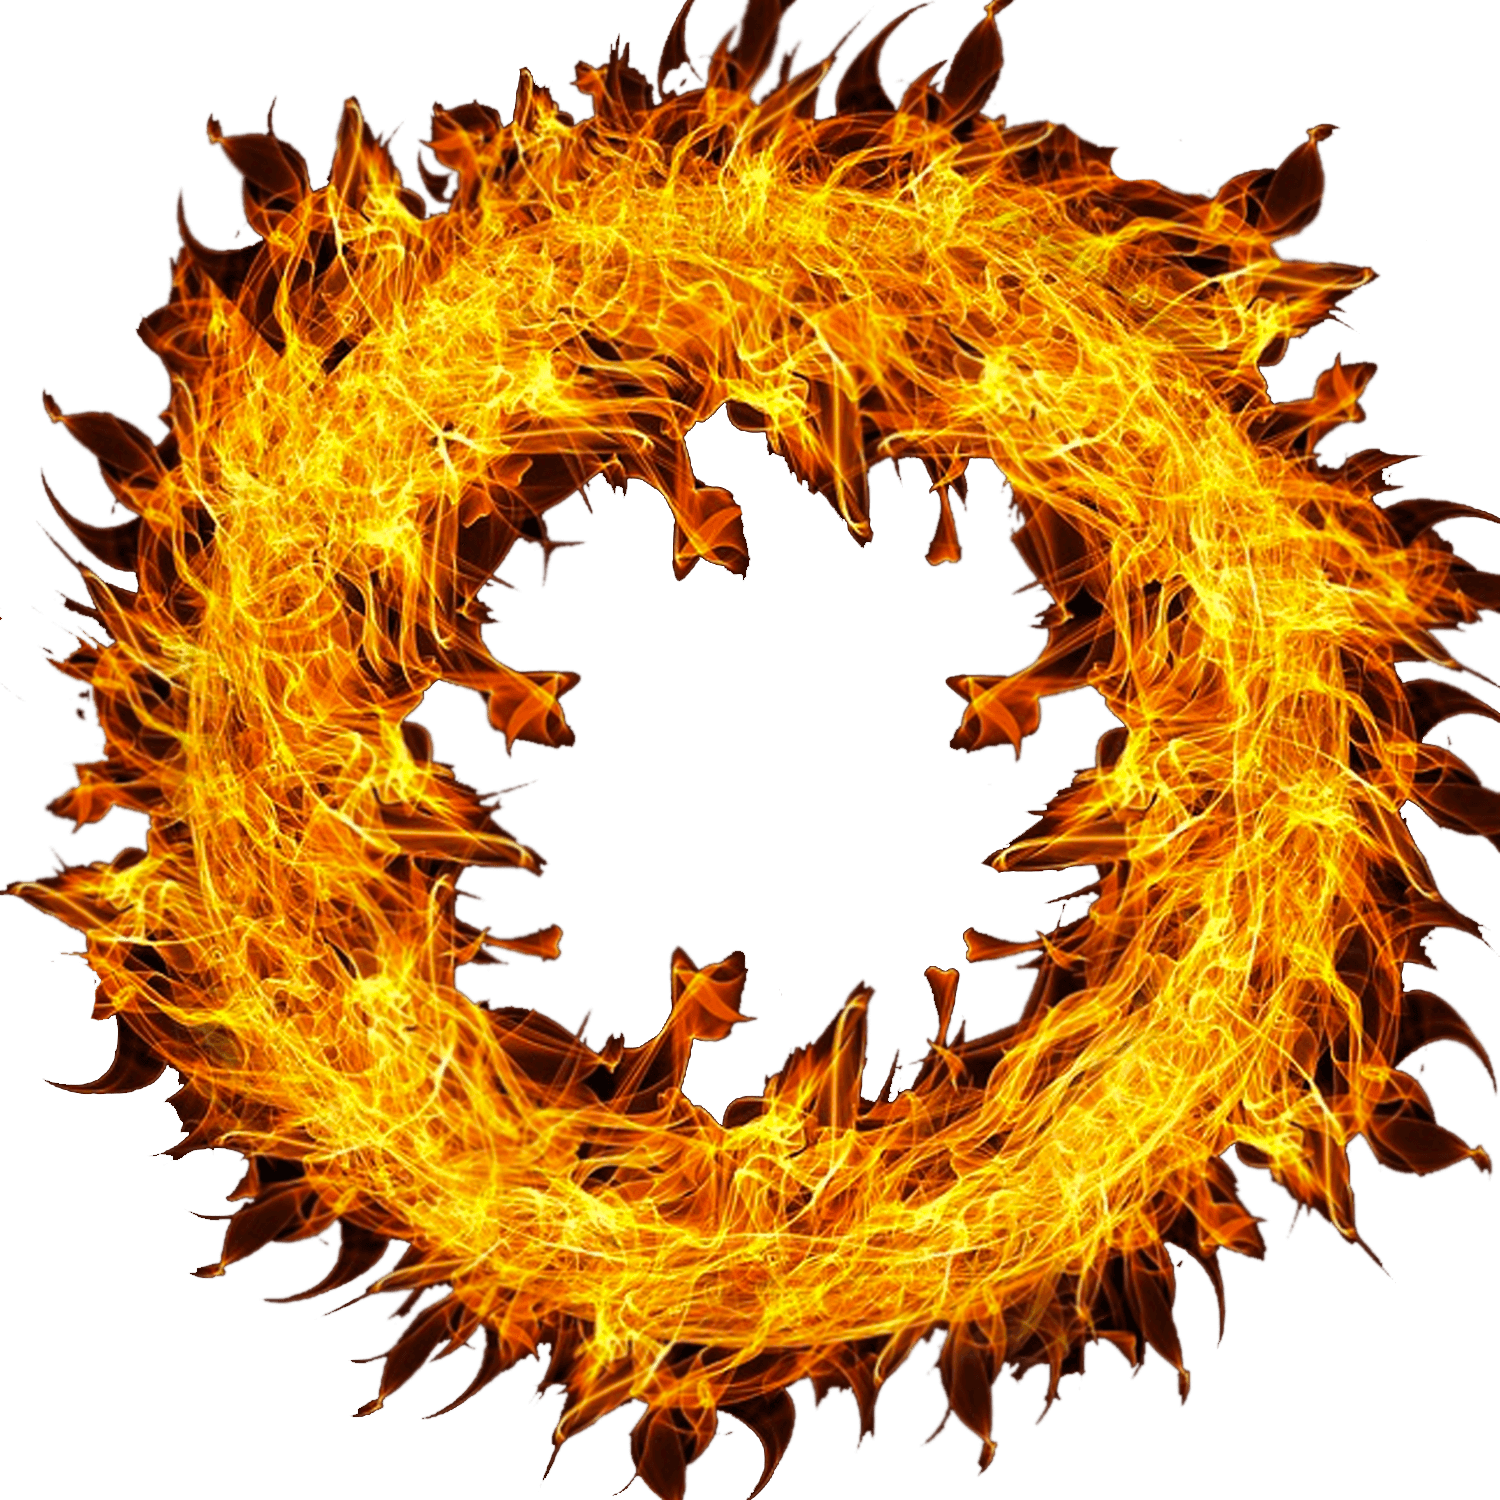 Fire Clip art - Flame of fire ring png download - 1500*1500 - Free